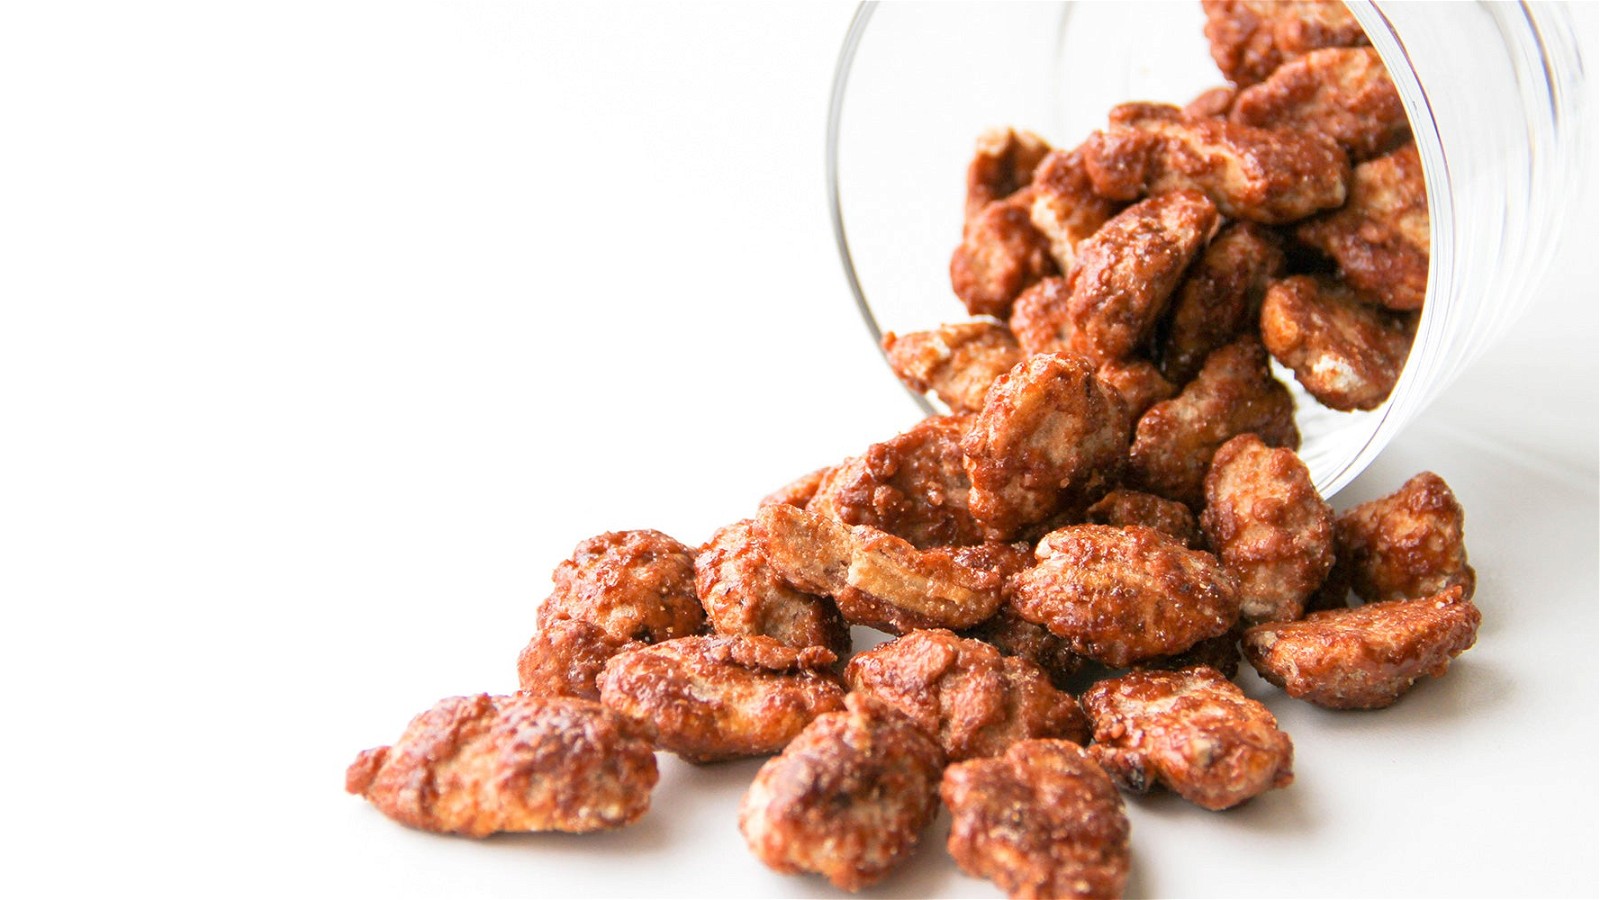 Image of Sugar-Free Glazed & Candied Nuts Recipe